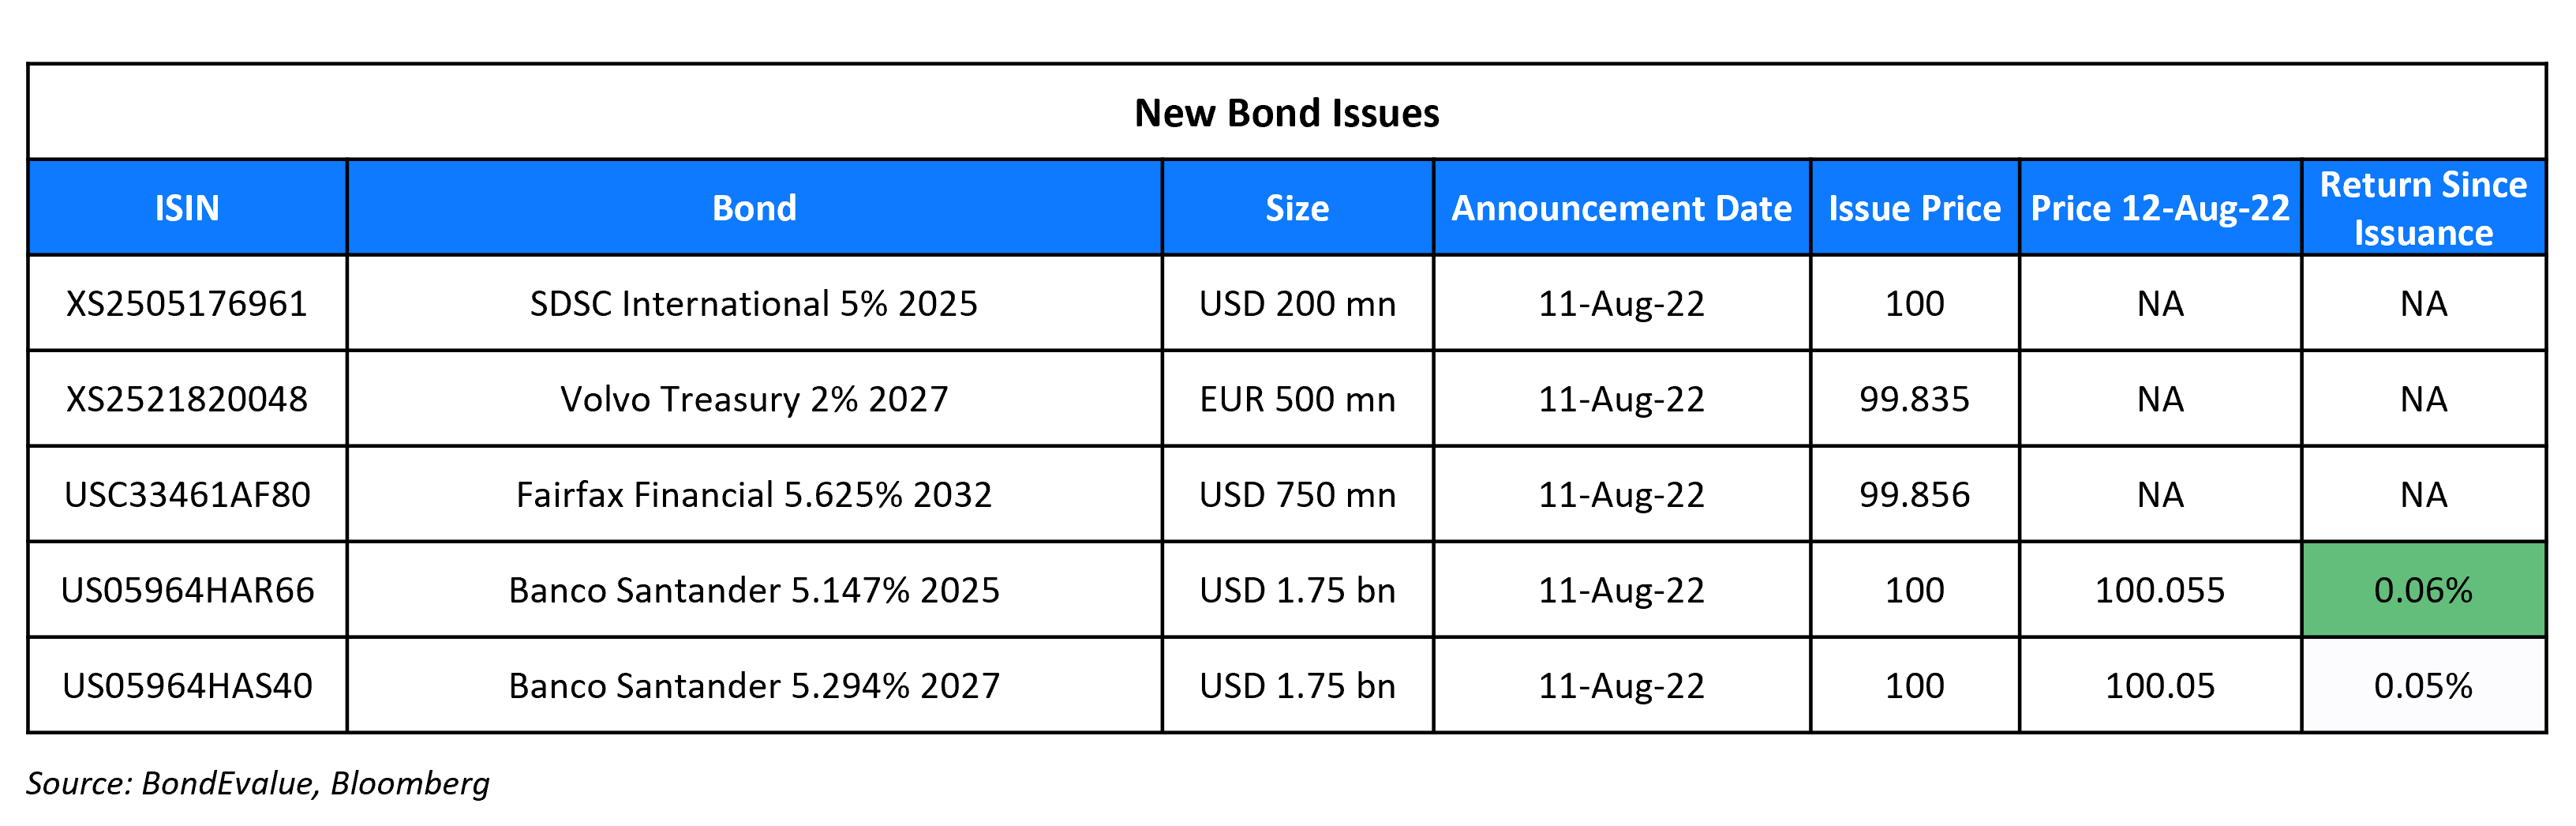 New Bond Issues 12 Aug 22